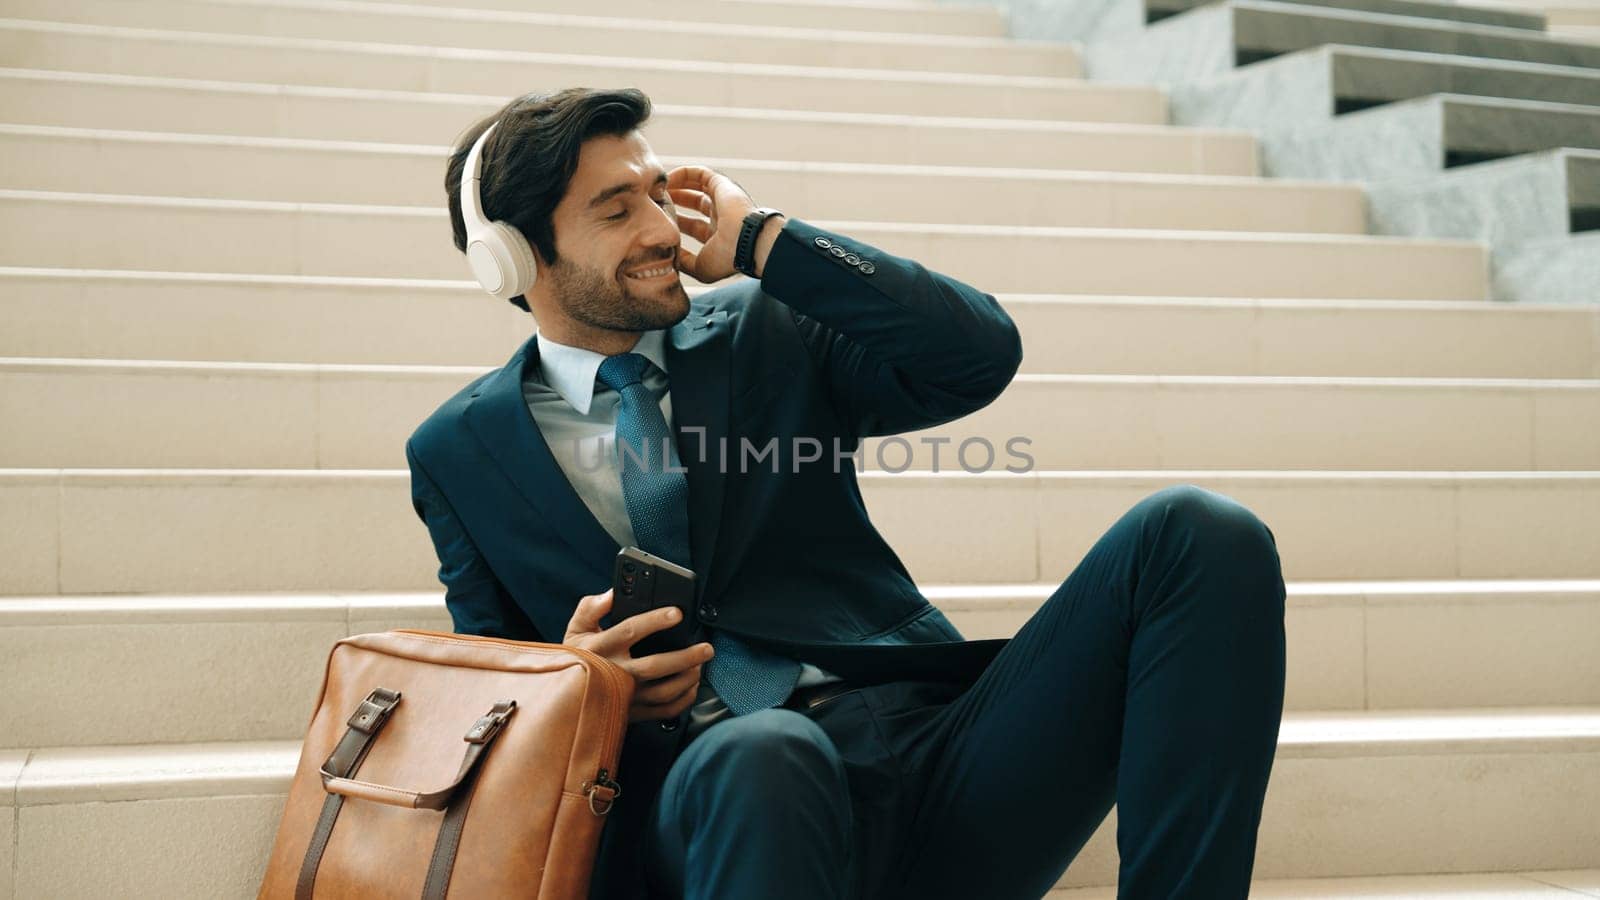 Smart business man listening and enjoy music while wear headphone. Profession project manager smiling while getting good news, getting promotion, increasing sales. Relaxing man enjoy music. Exultant.